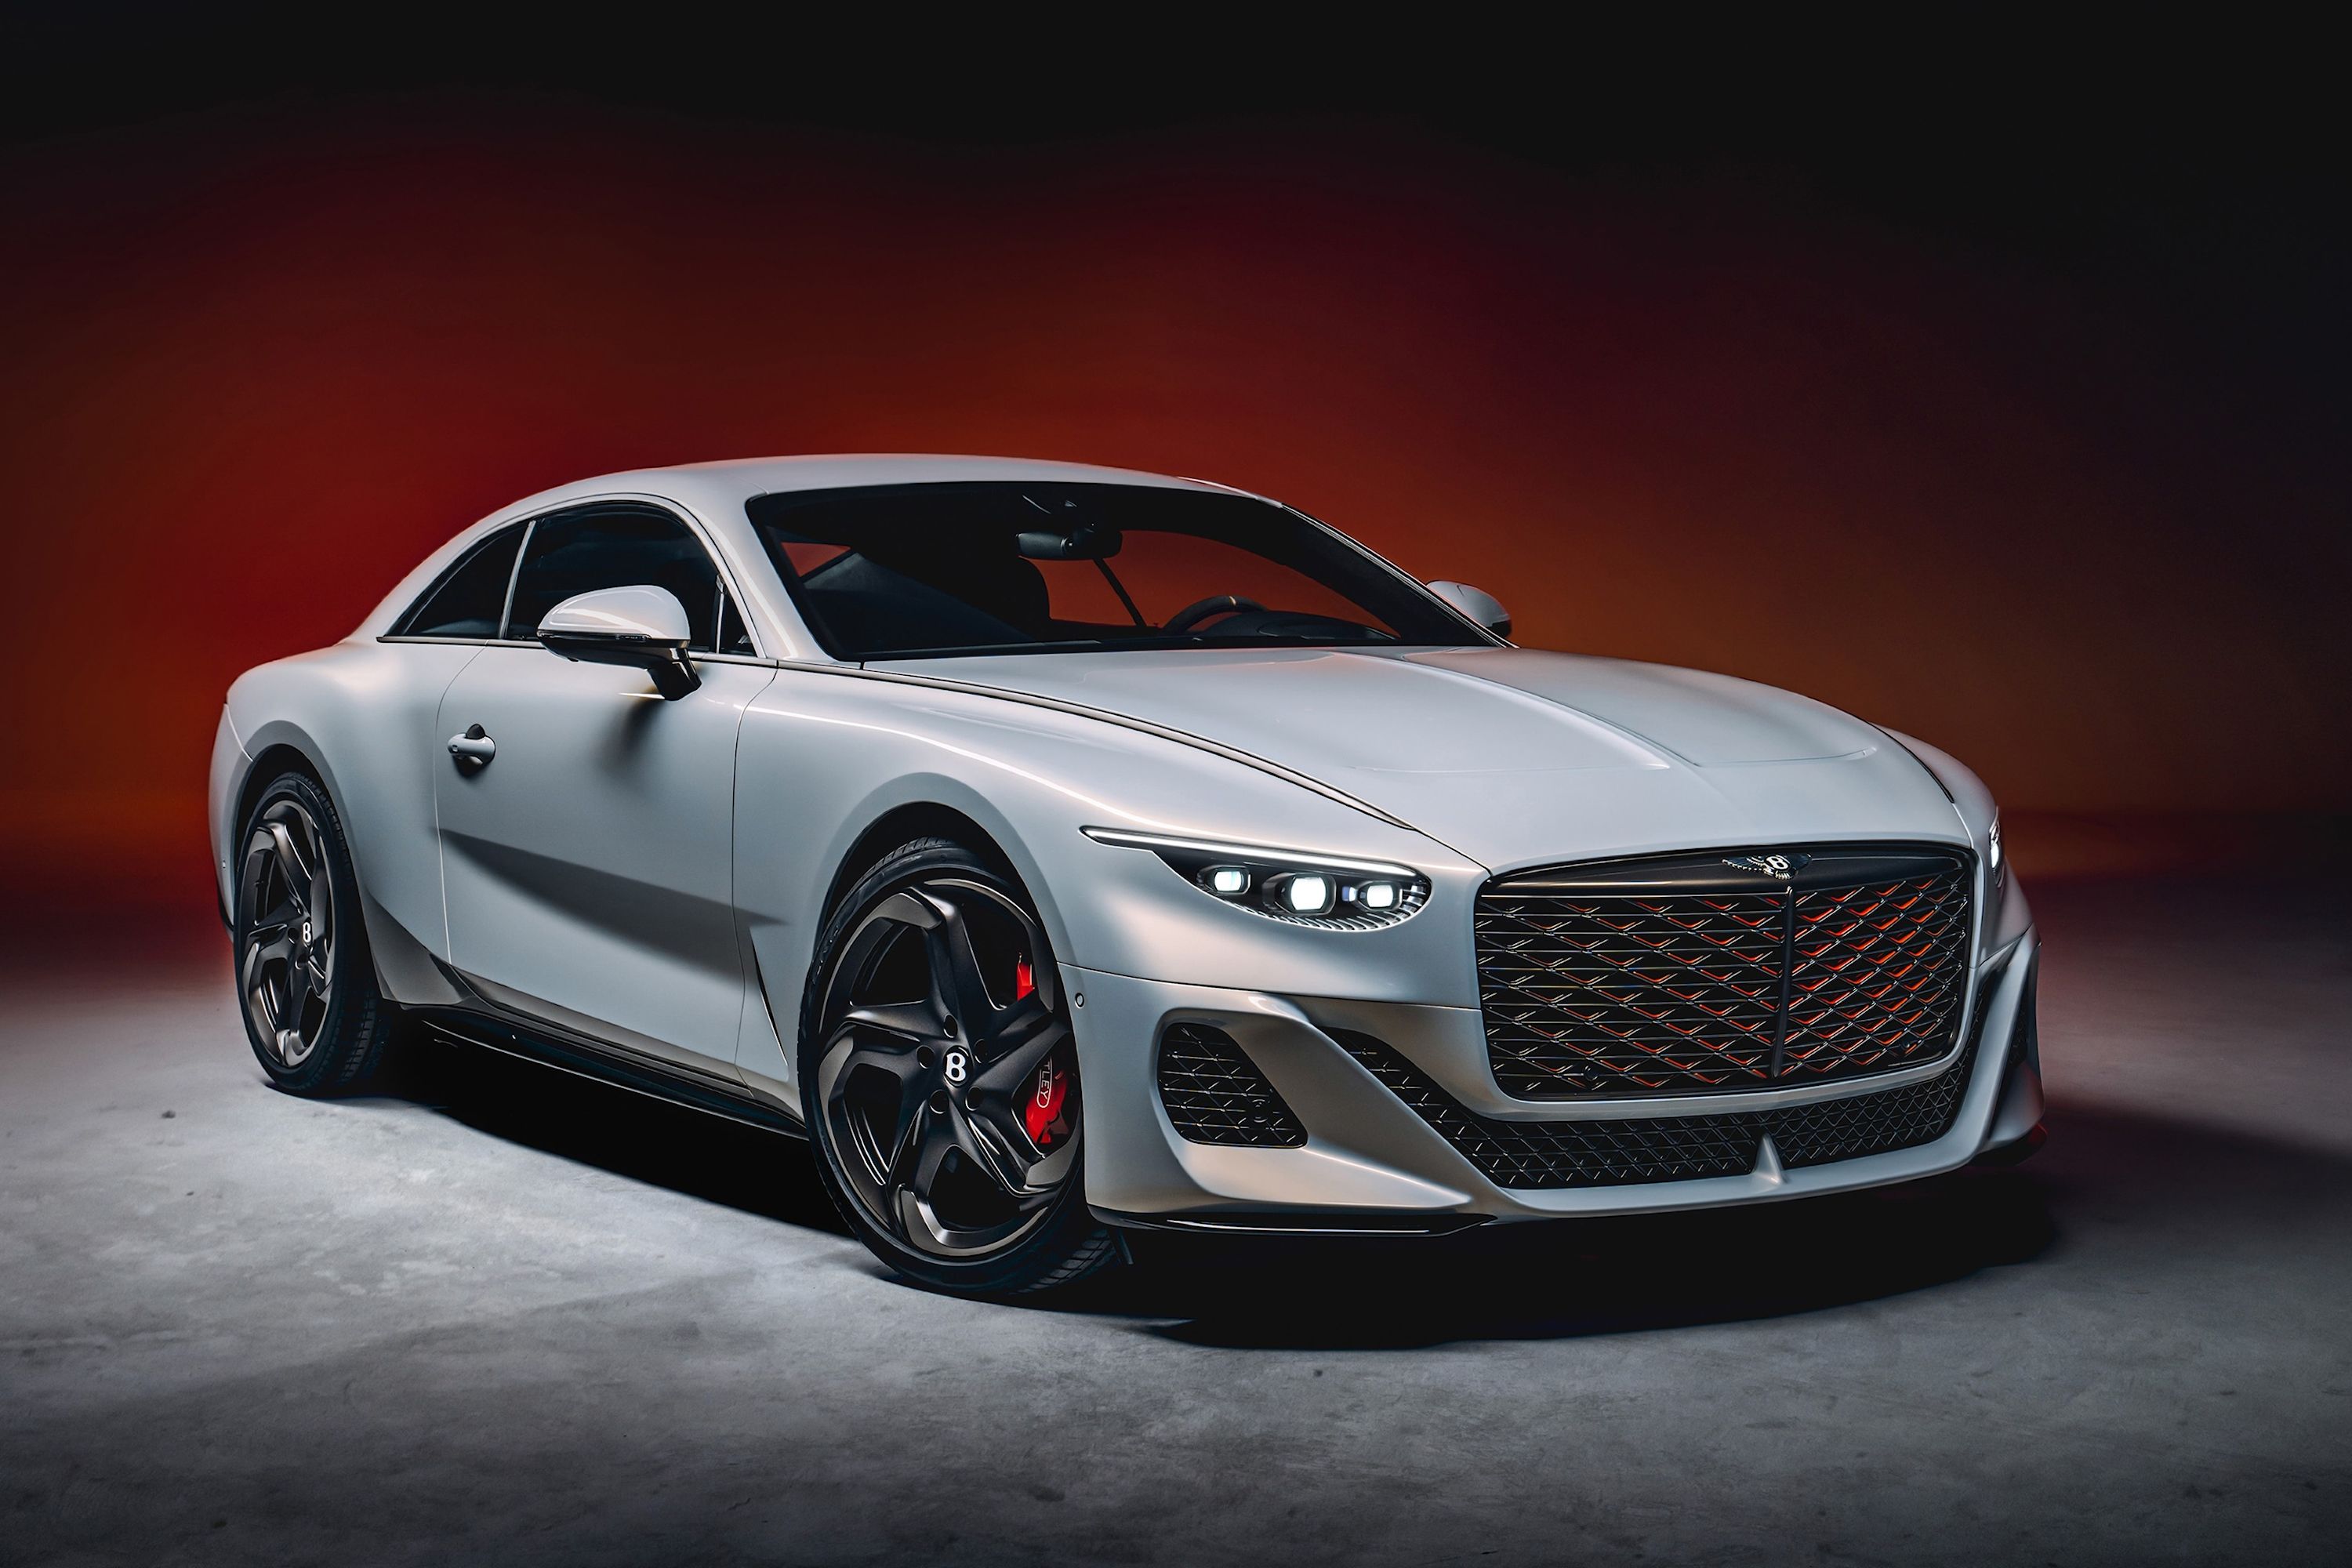 2023 Bentley Batur Price and Competition